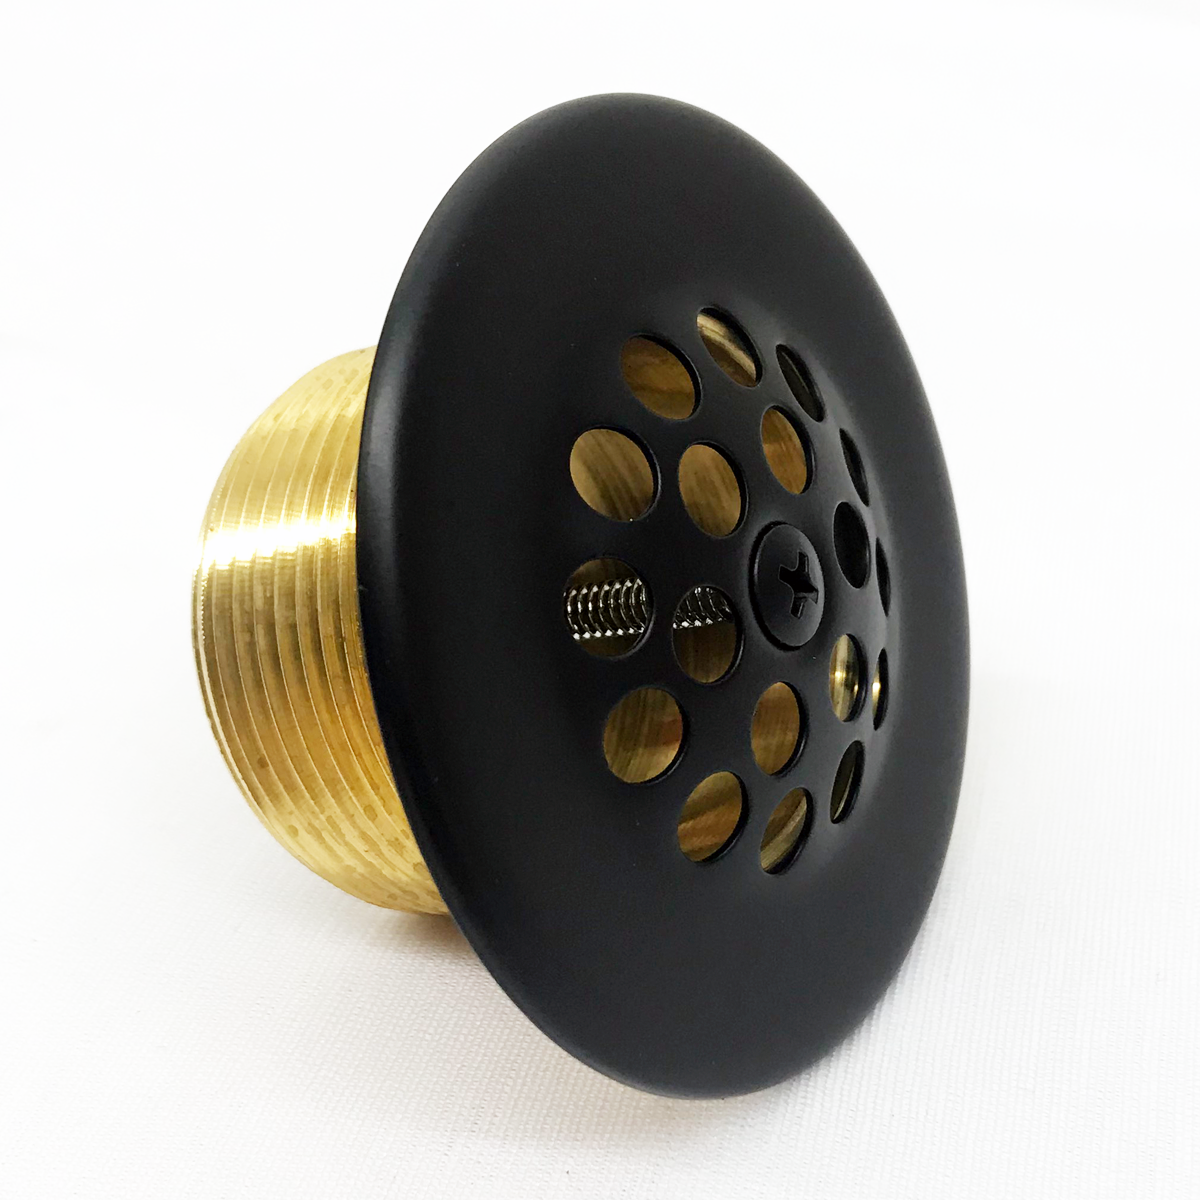 Brass Tub Drain Body with Rubber Washer-C8054.50 - Aluids Usa